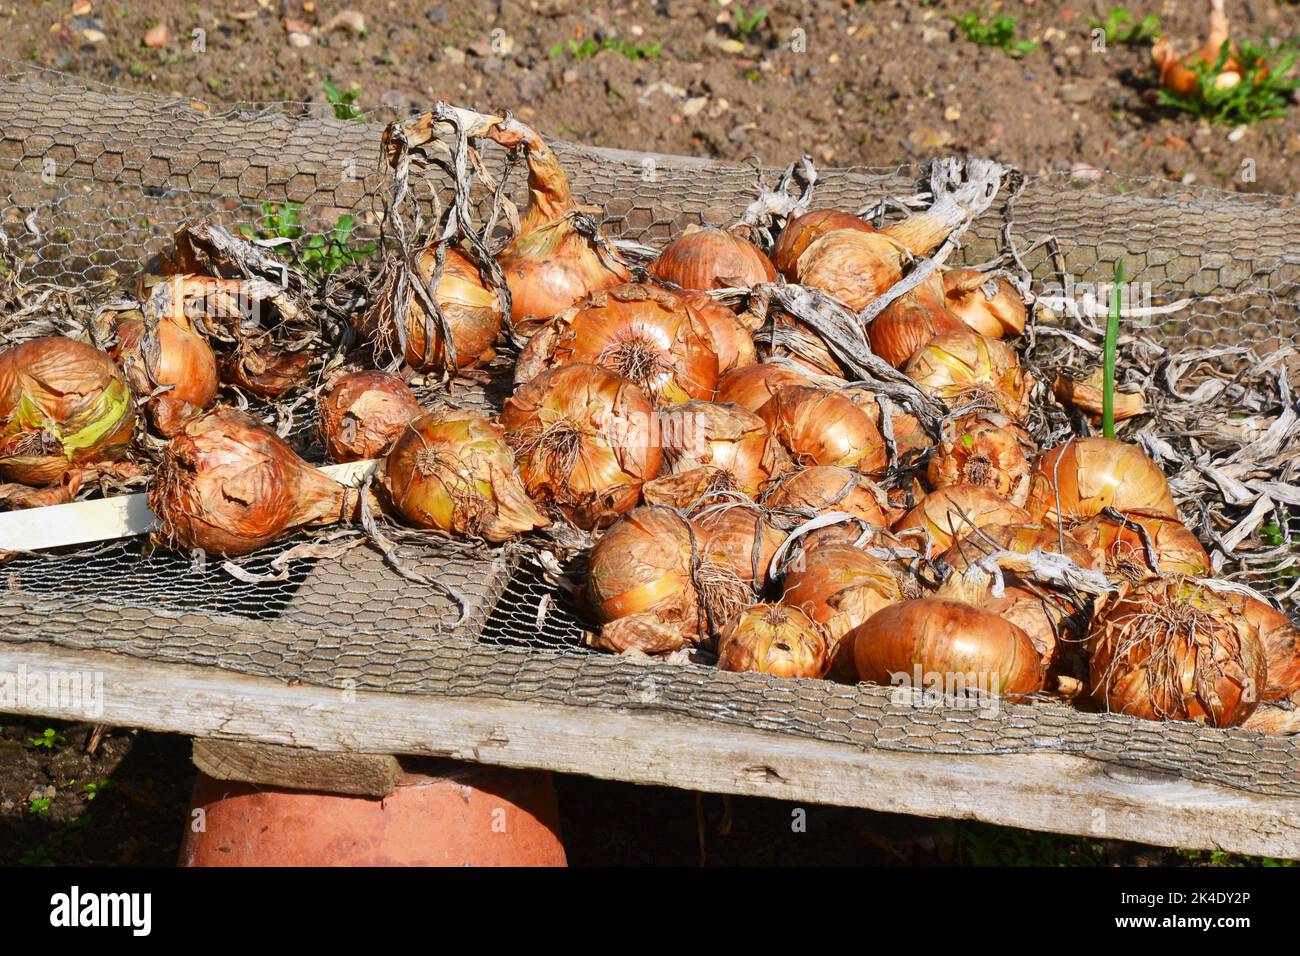 Onions in a vegetable plot raised from the ground to dry, UK Stock Photo